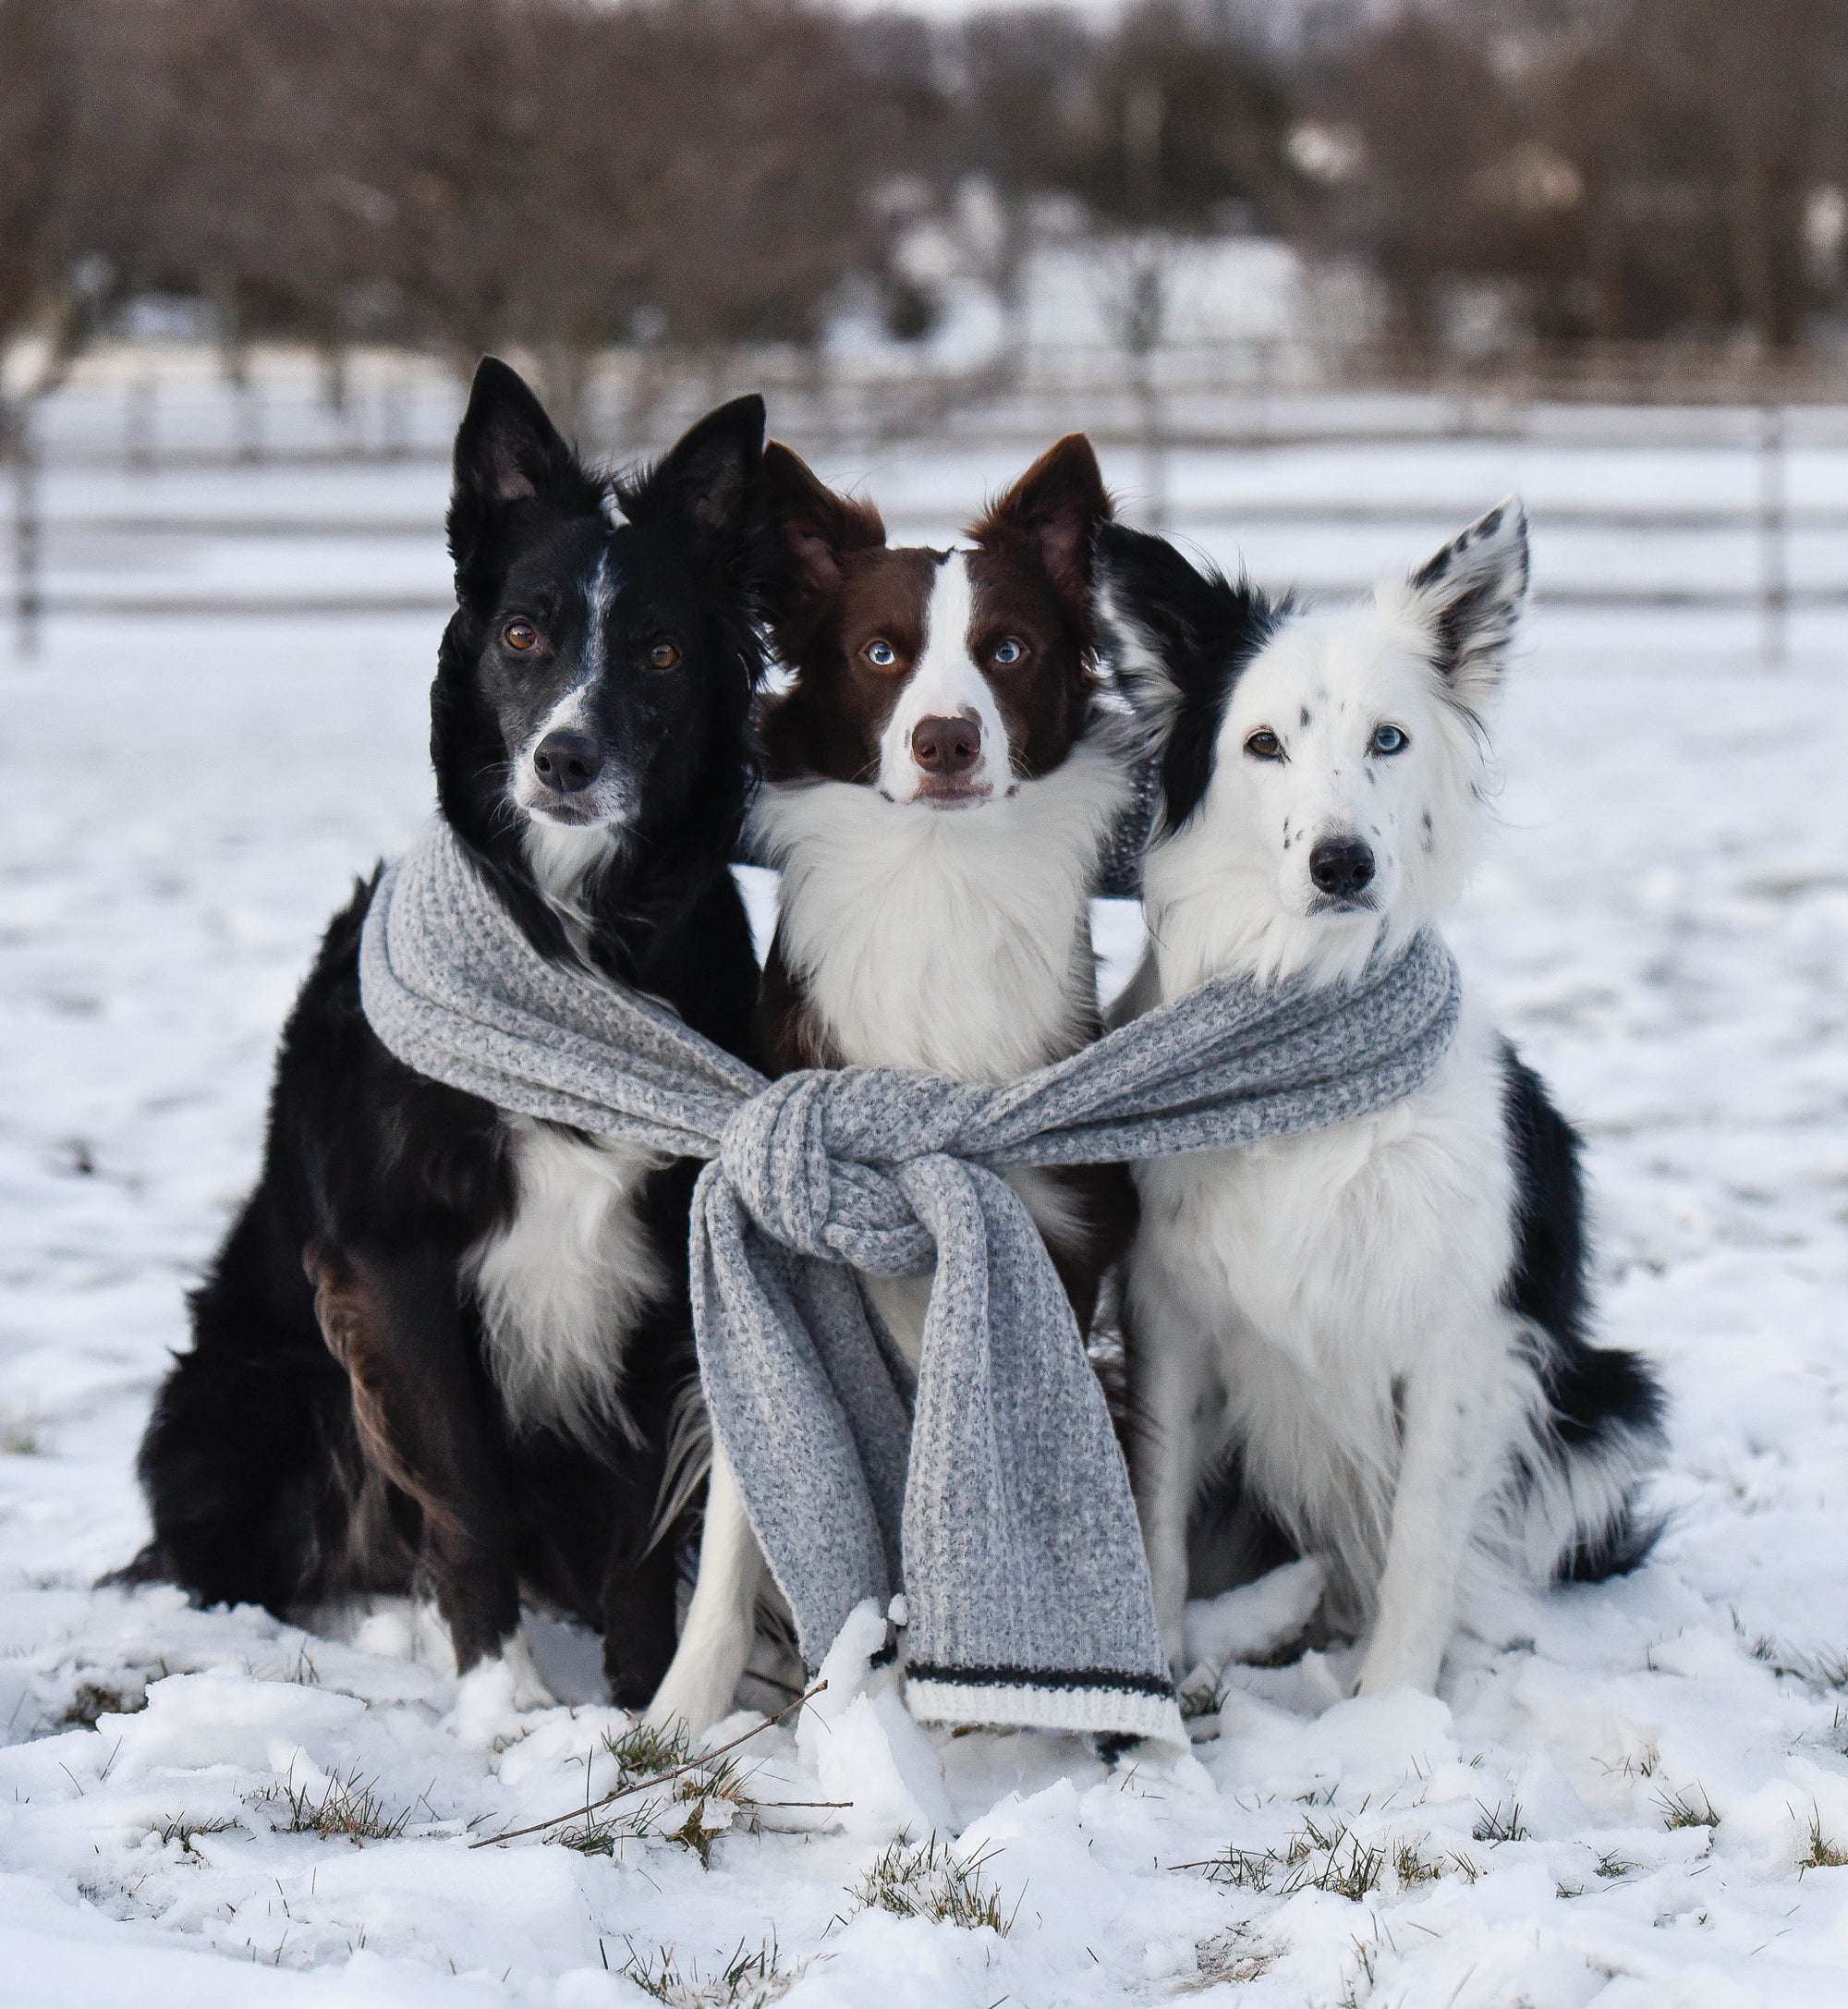 A group of dogs wearing scarves outdoors in the snow.